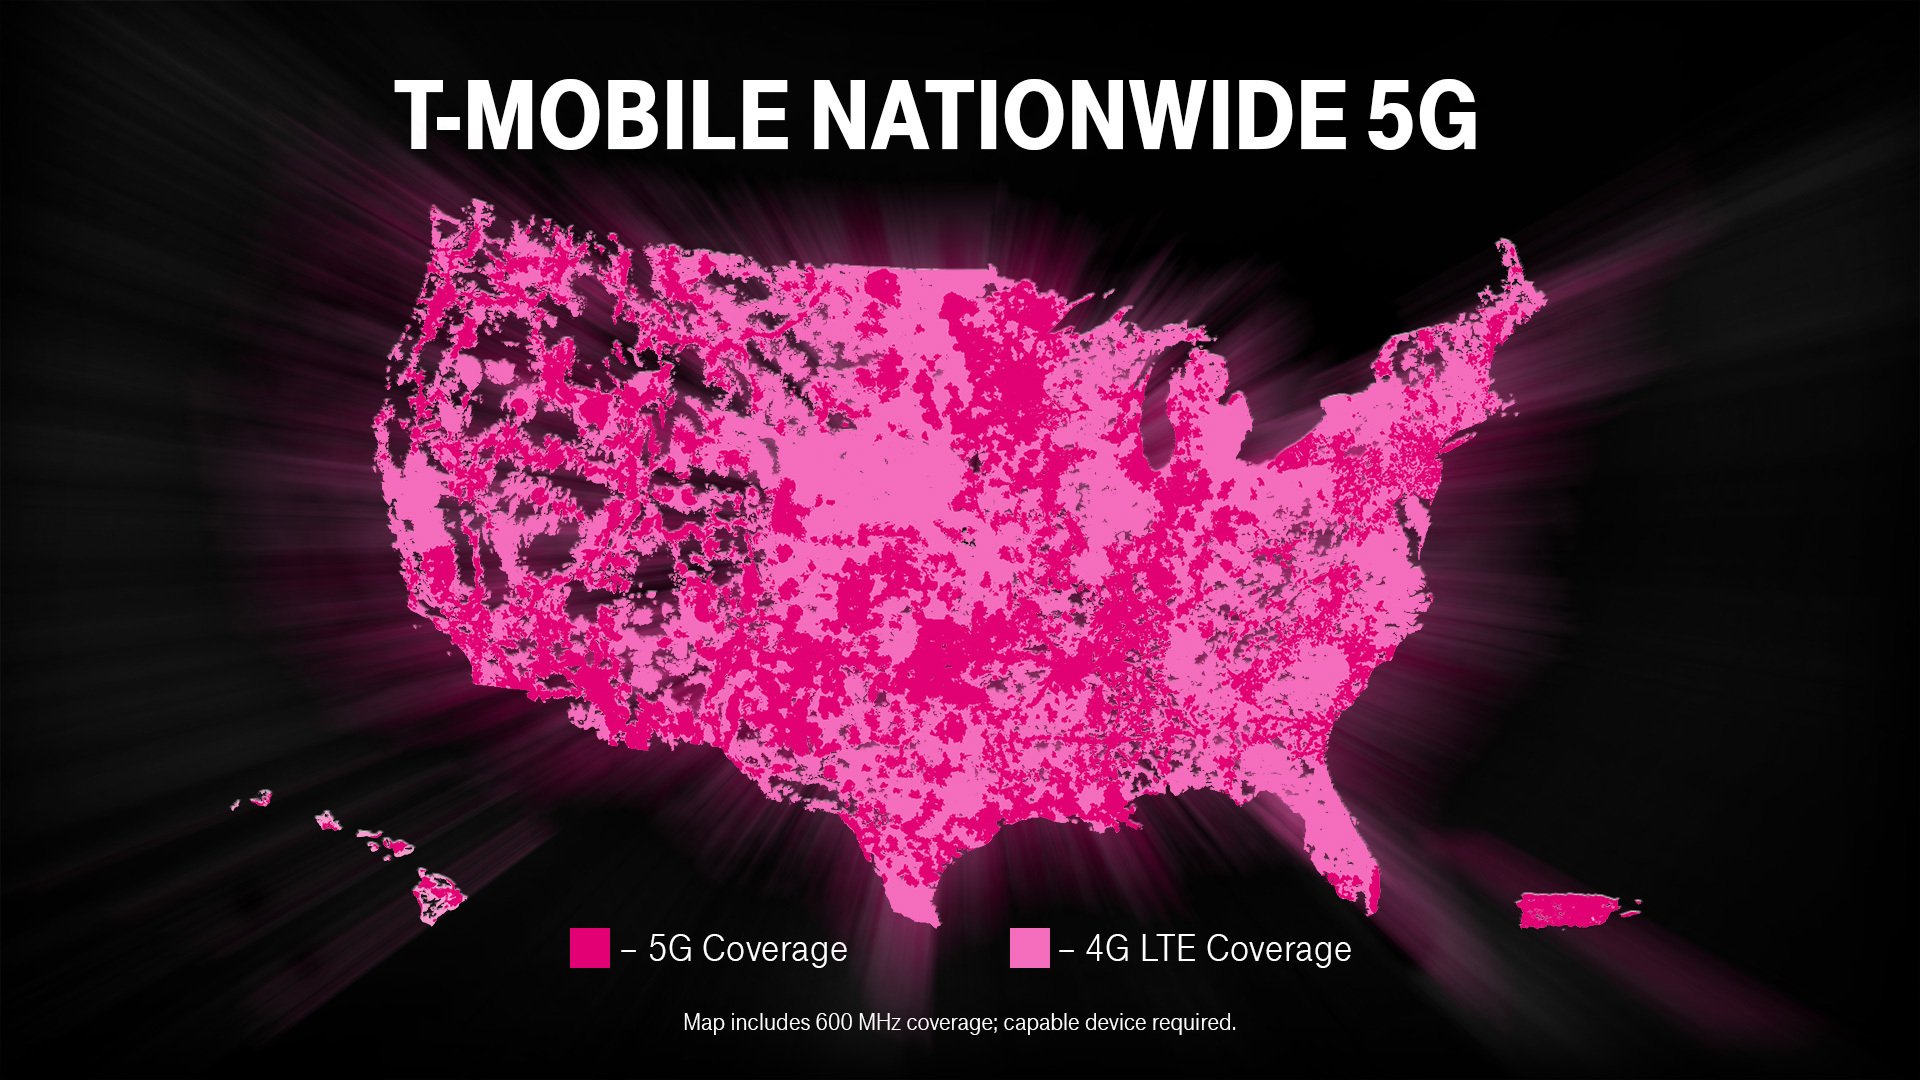 T-Mobile 5G with 600Mhz